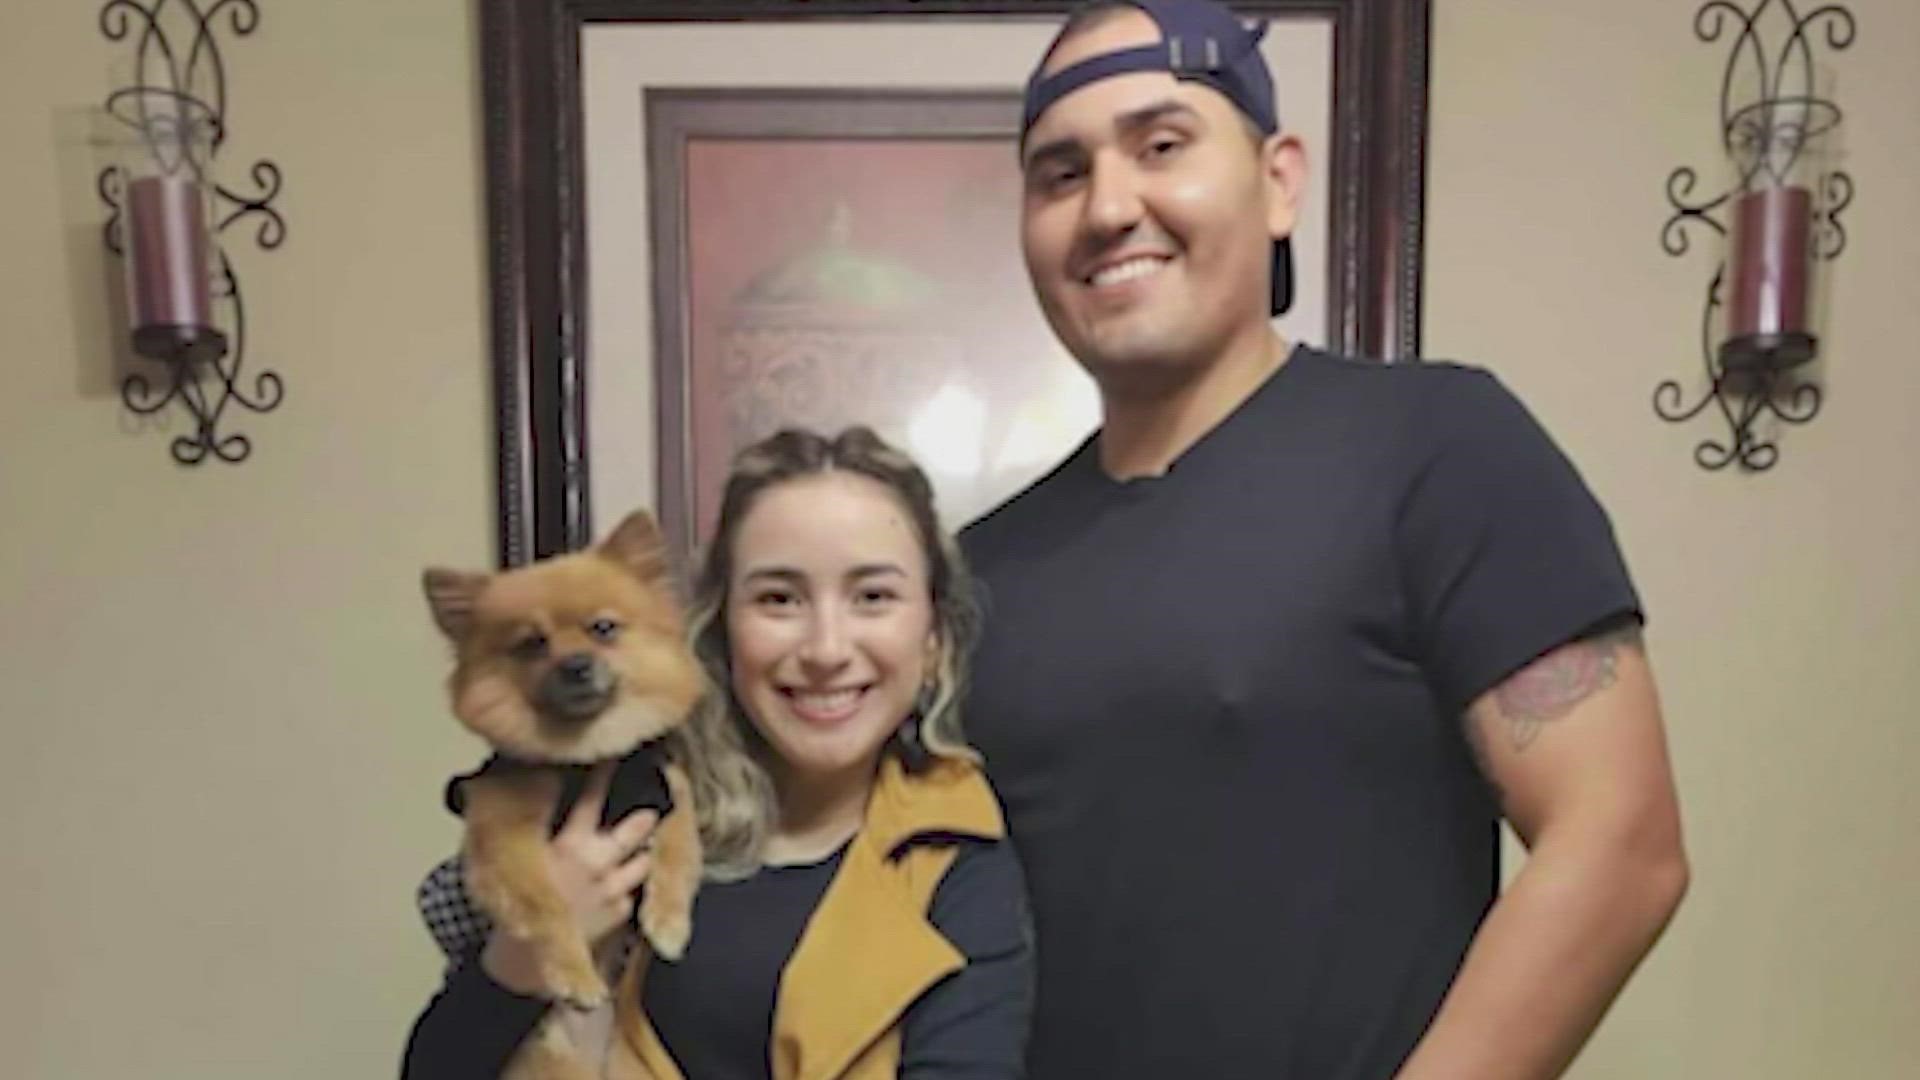 Mauro Gauna was found shot to death inside his car on the North Freeway last week. Investigators are still trying to figure out what happened.